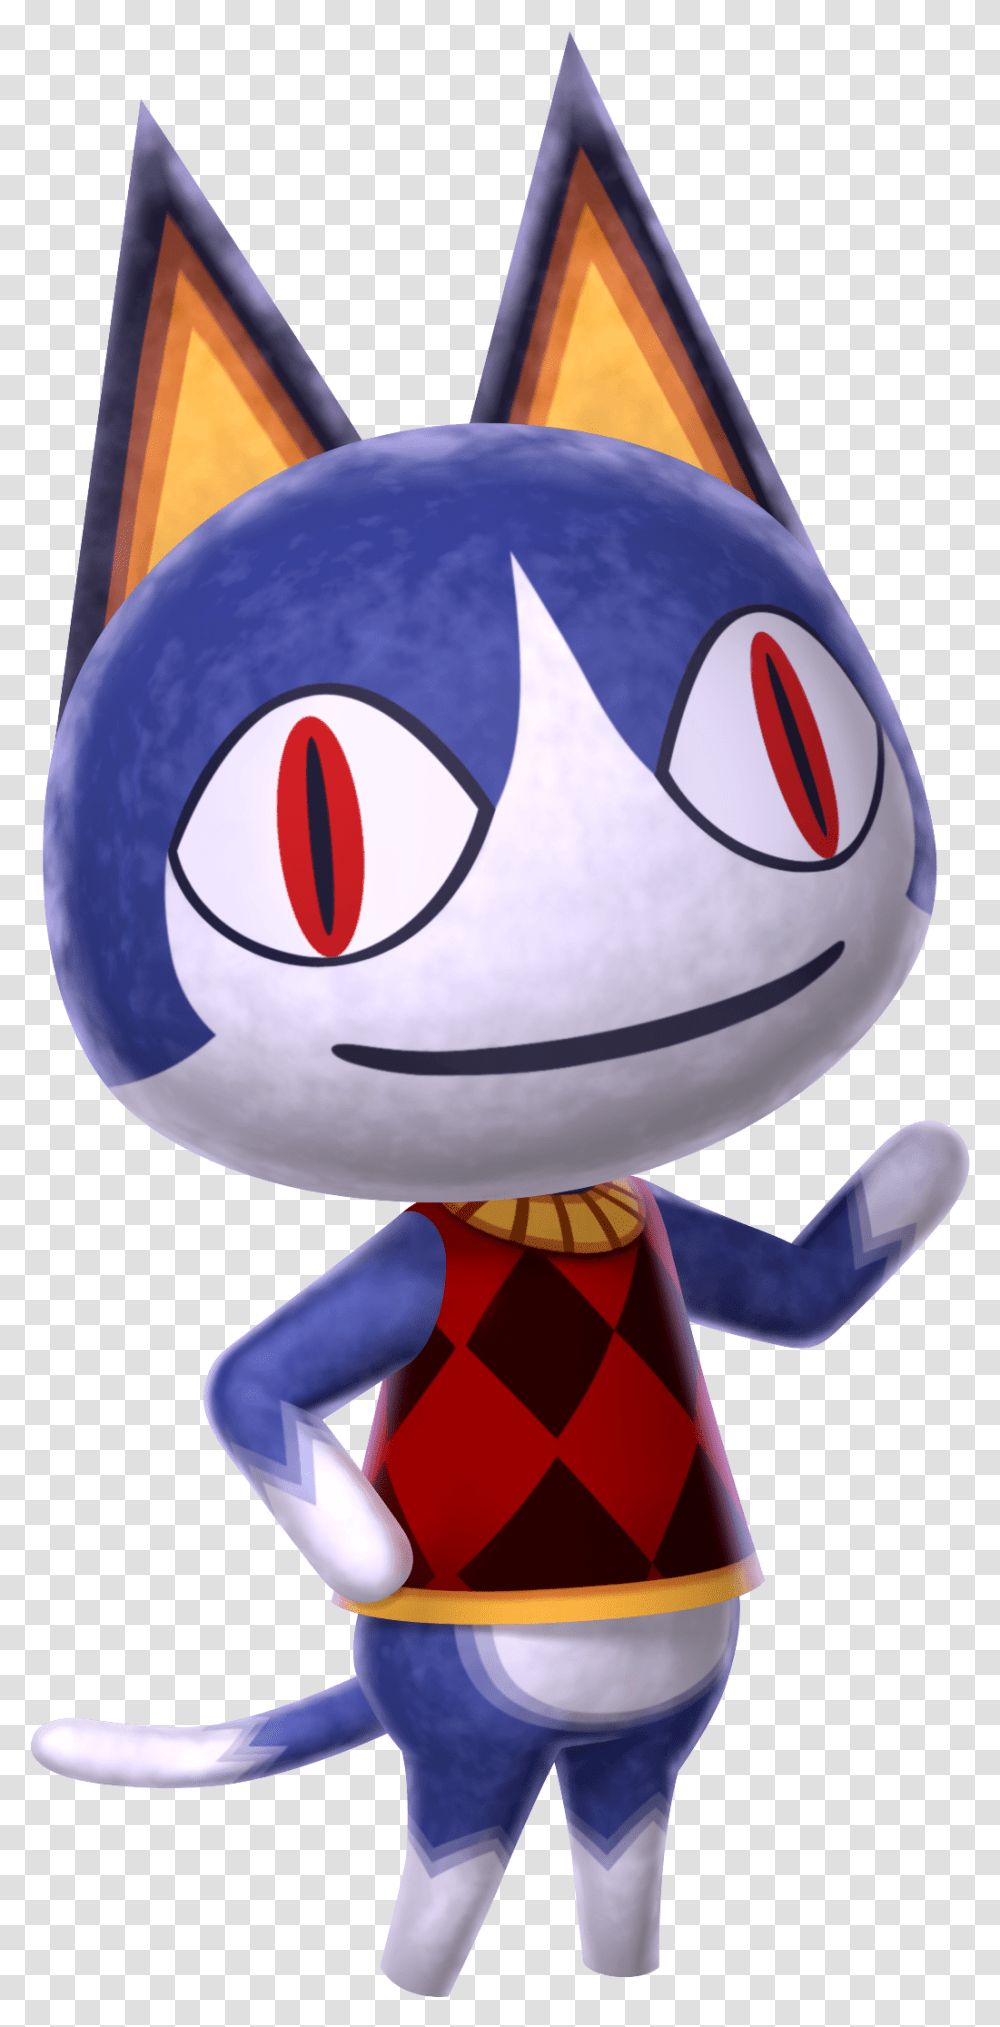 Animal Crossing New Leaf The Other New Leaf Animal Crossing Characters, Plush, Toy, Figurine, Doll Transparent Png